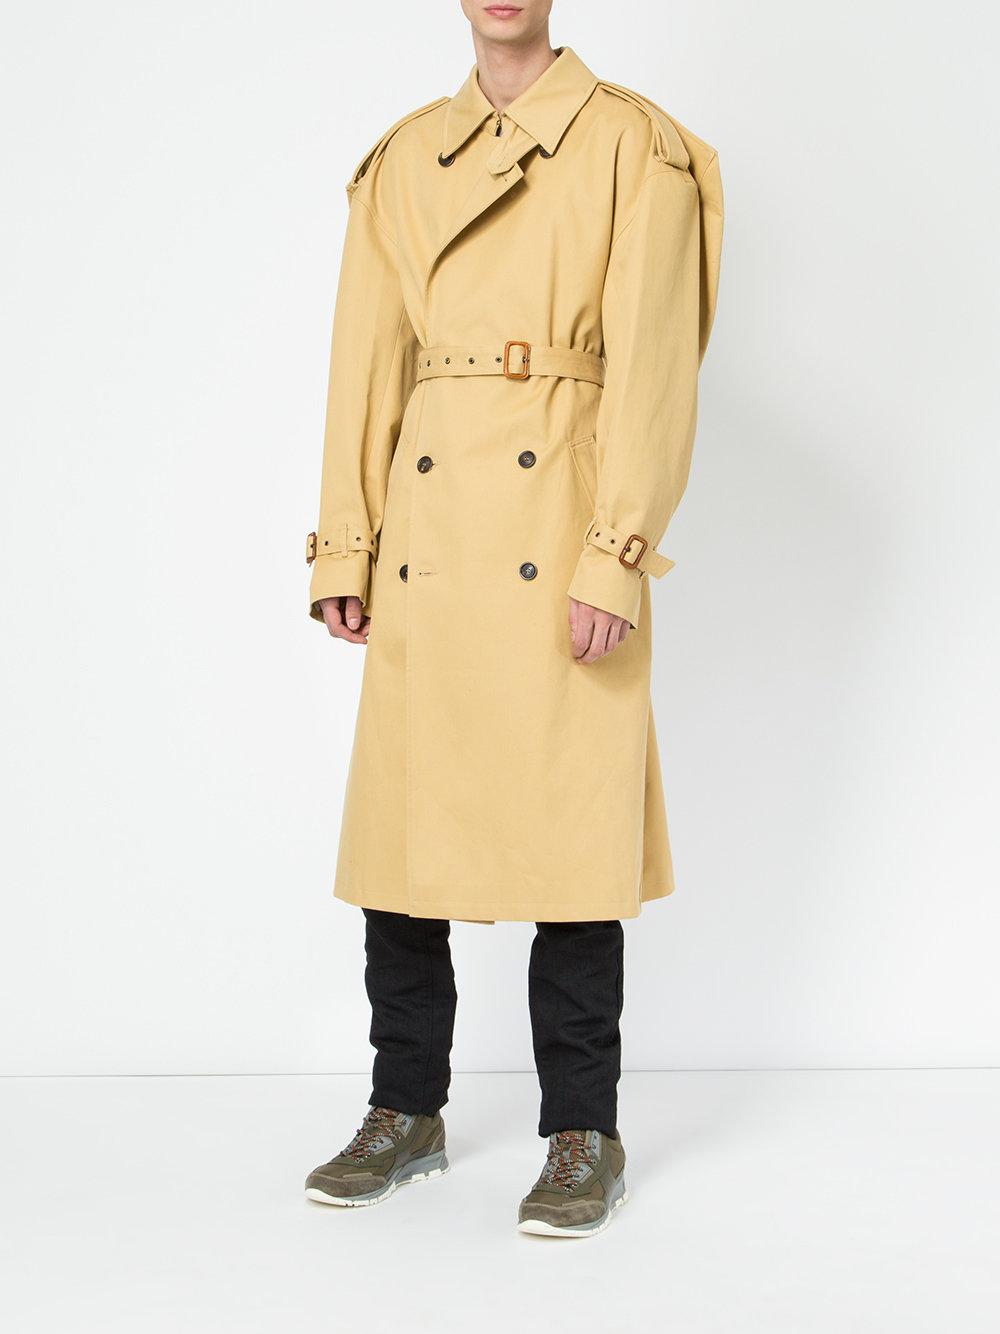 Y. Project Cotton Belted Trench Coat in Natural for Men - Lyst